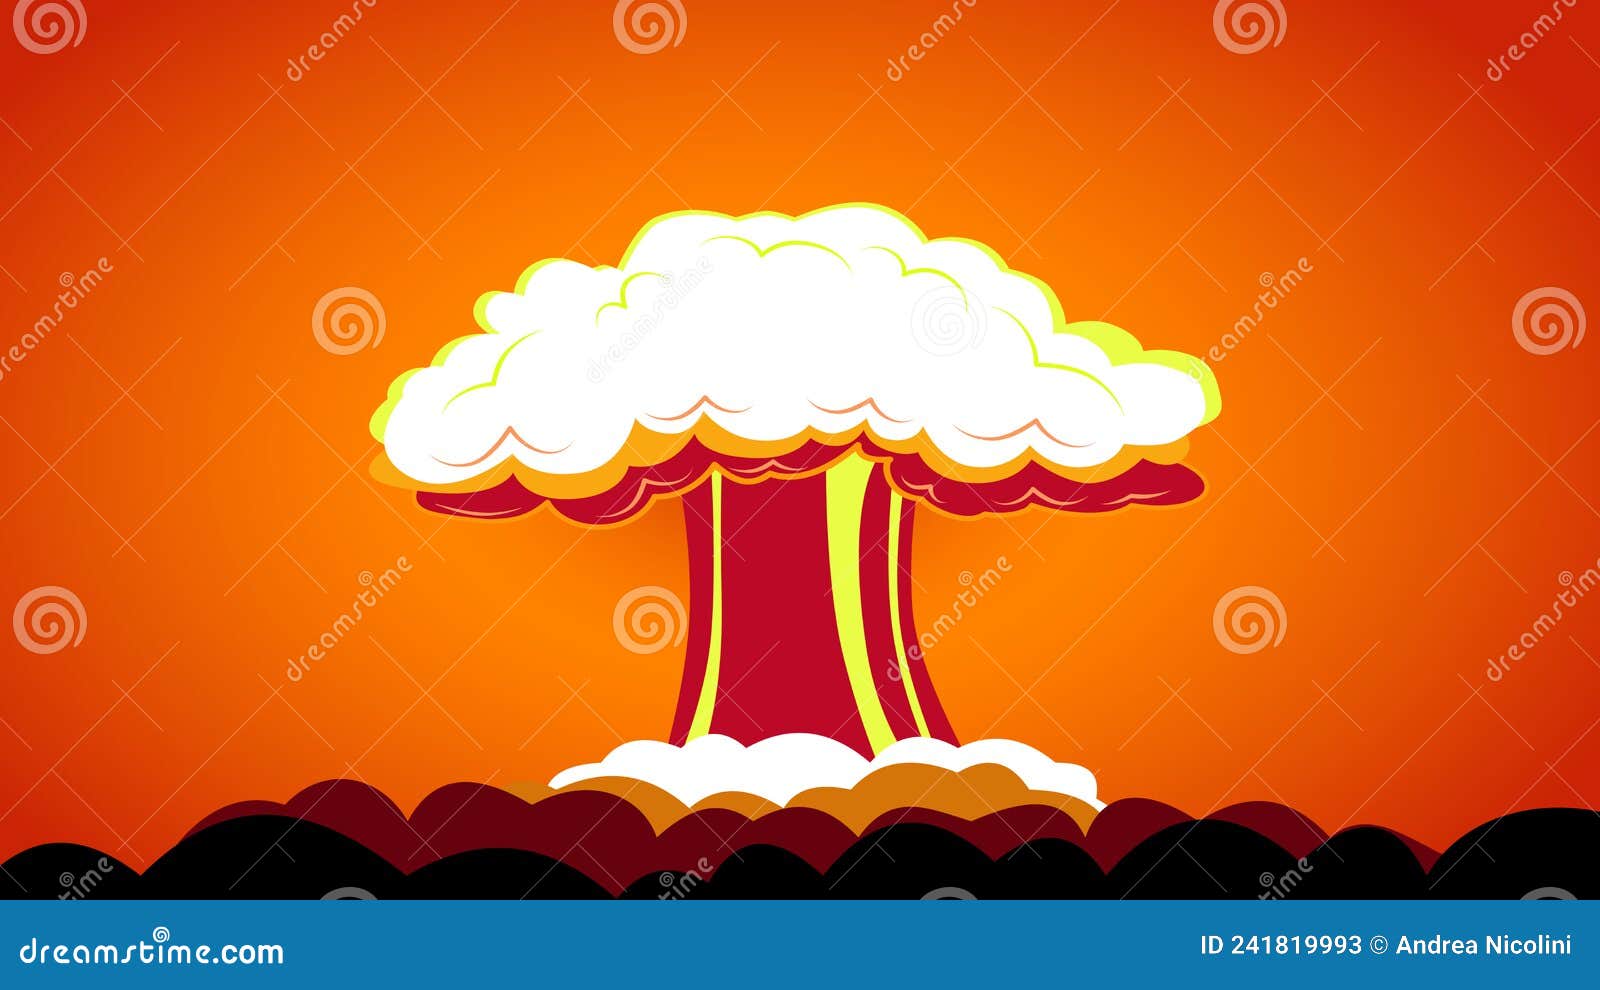 illustrative image of an atomic bomb explosion, on the red background